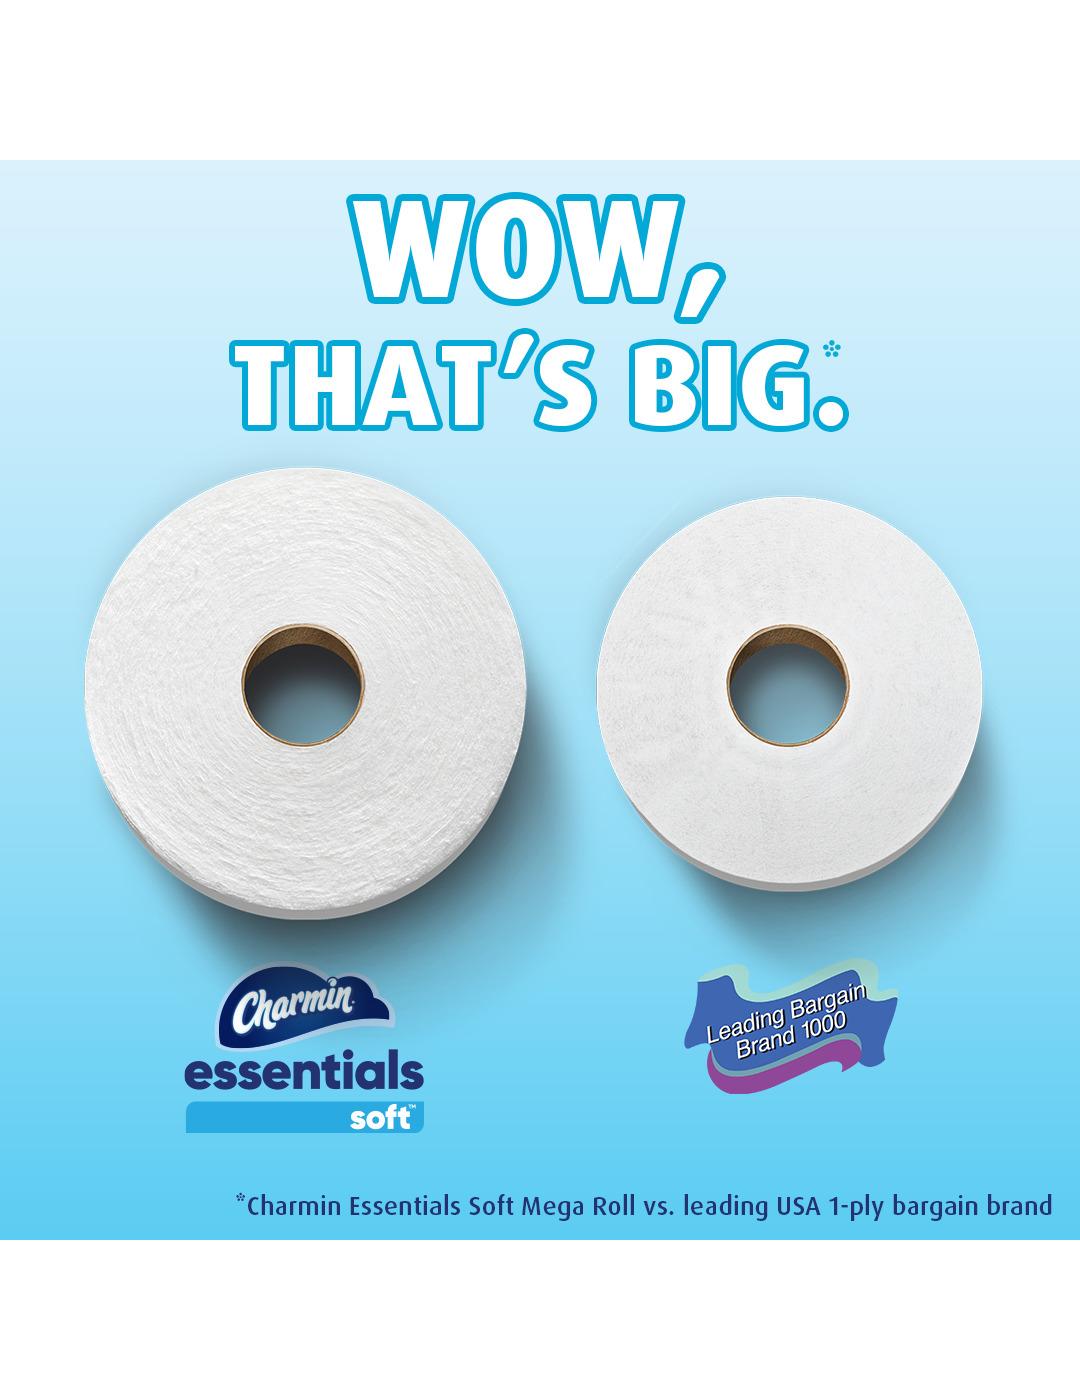 Charmin Essentials Soft Toilet Paper; image 2 of 13